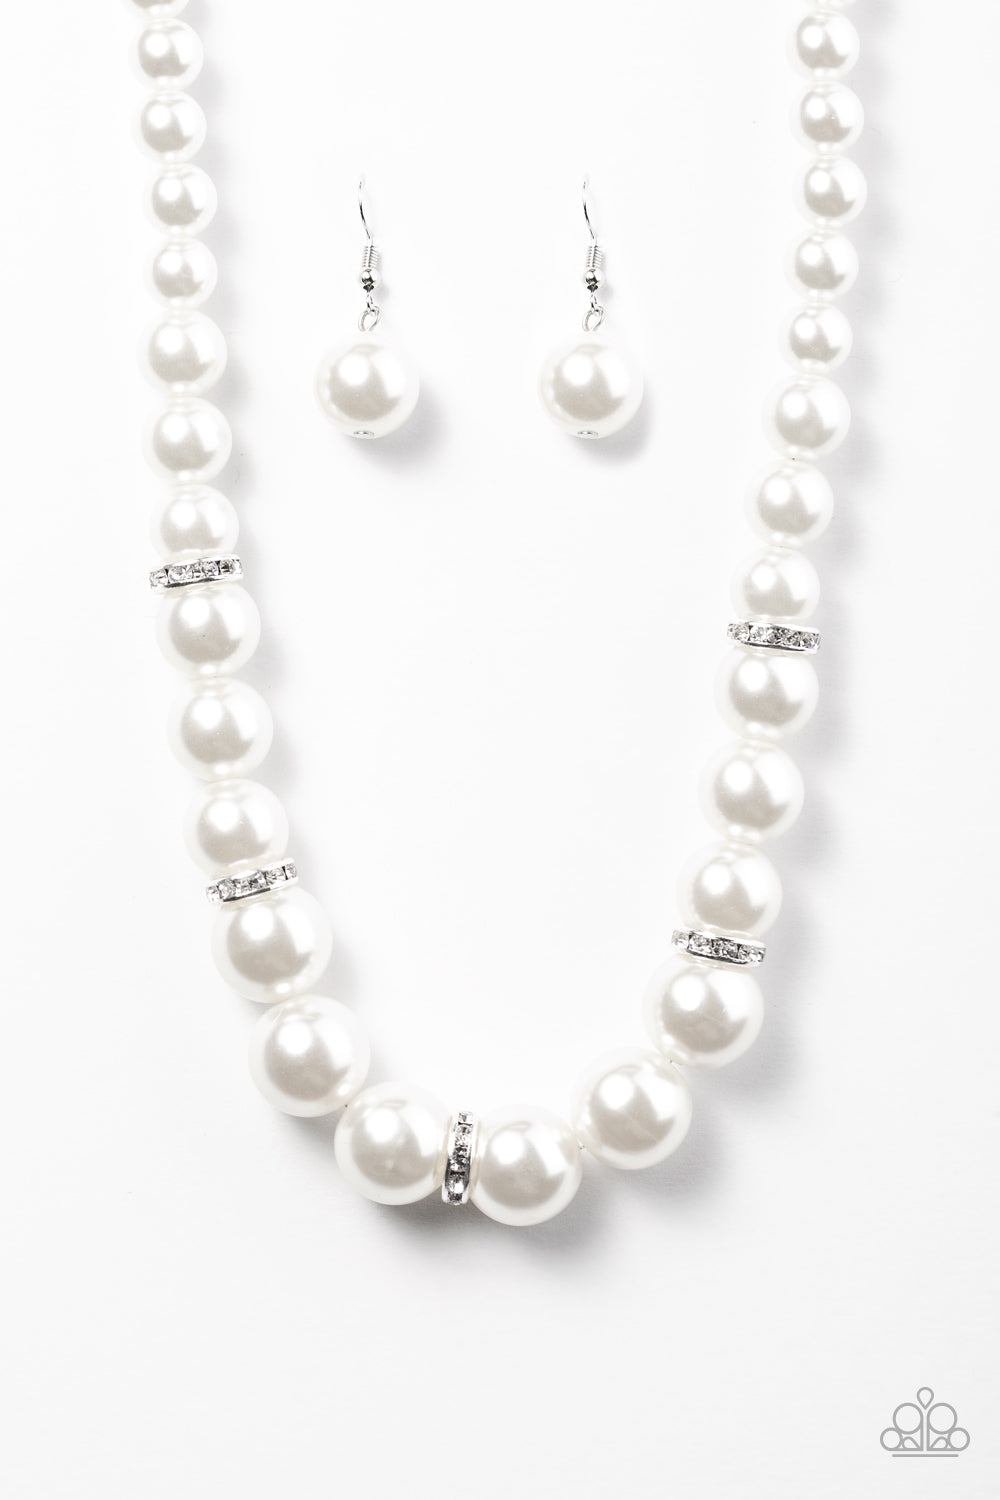 Paparazzi Accessories: Sail Away with Me - Gold Pearl Necklace